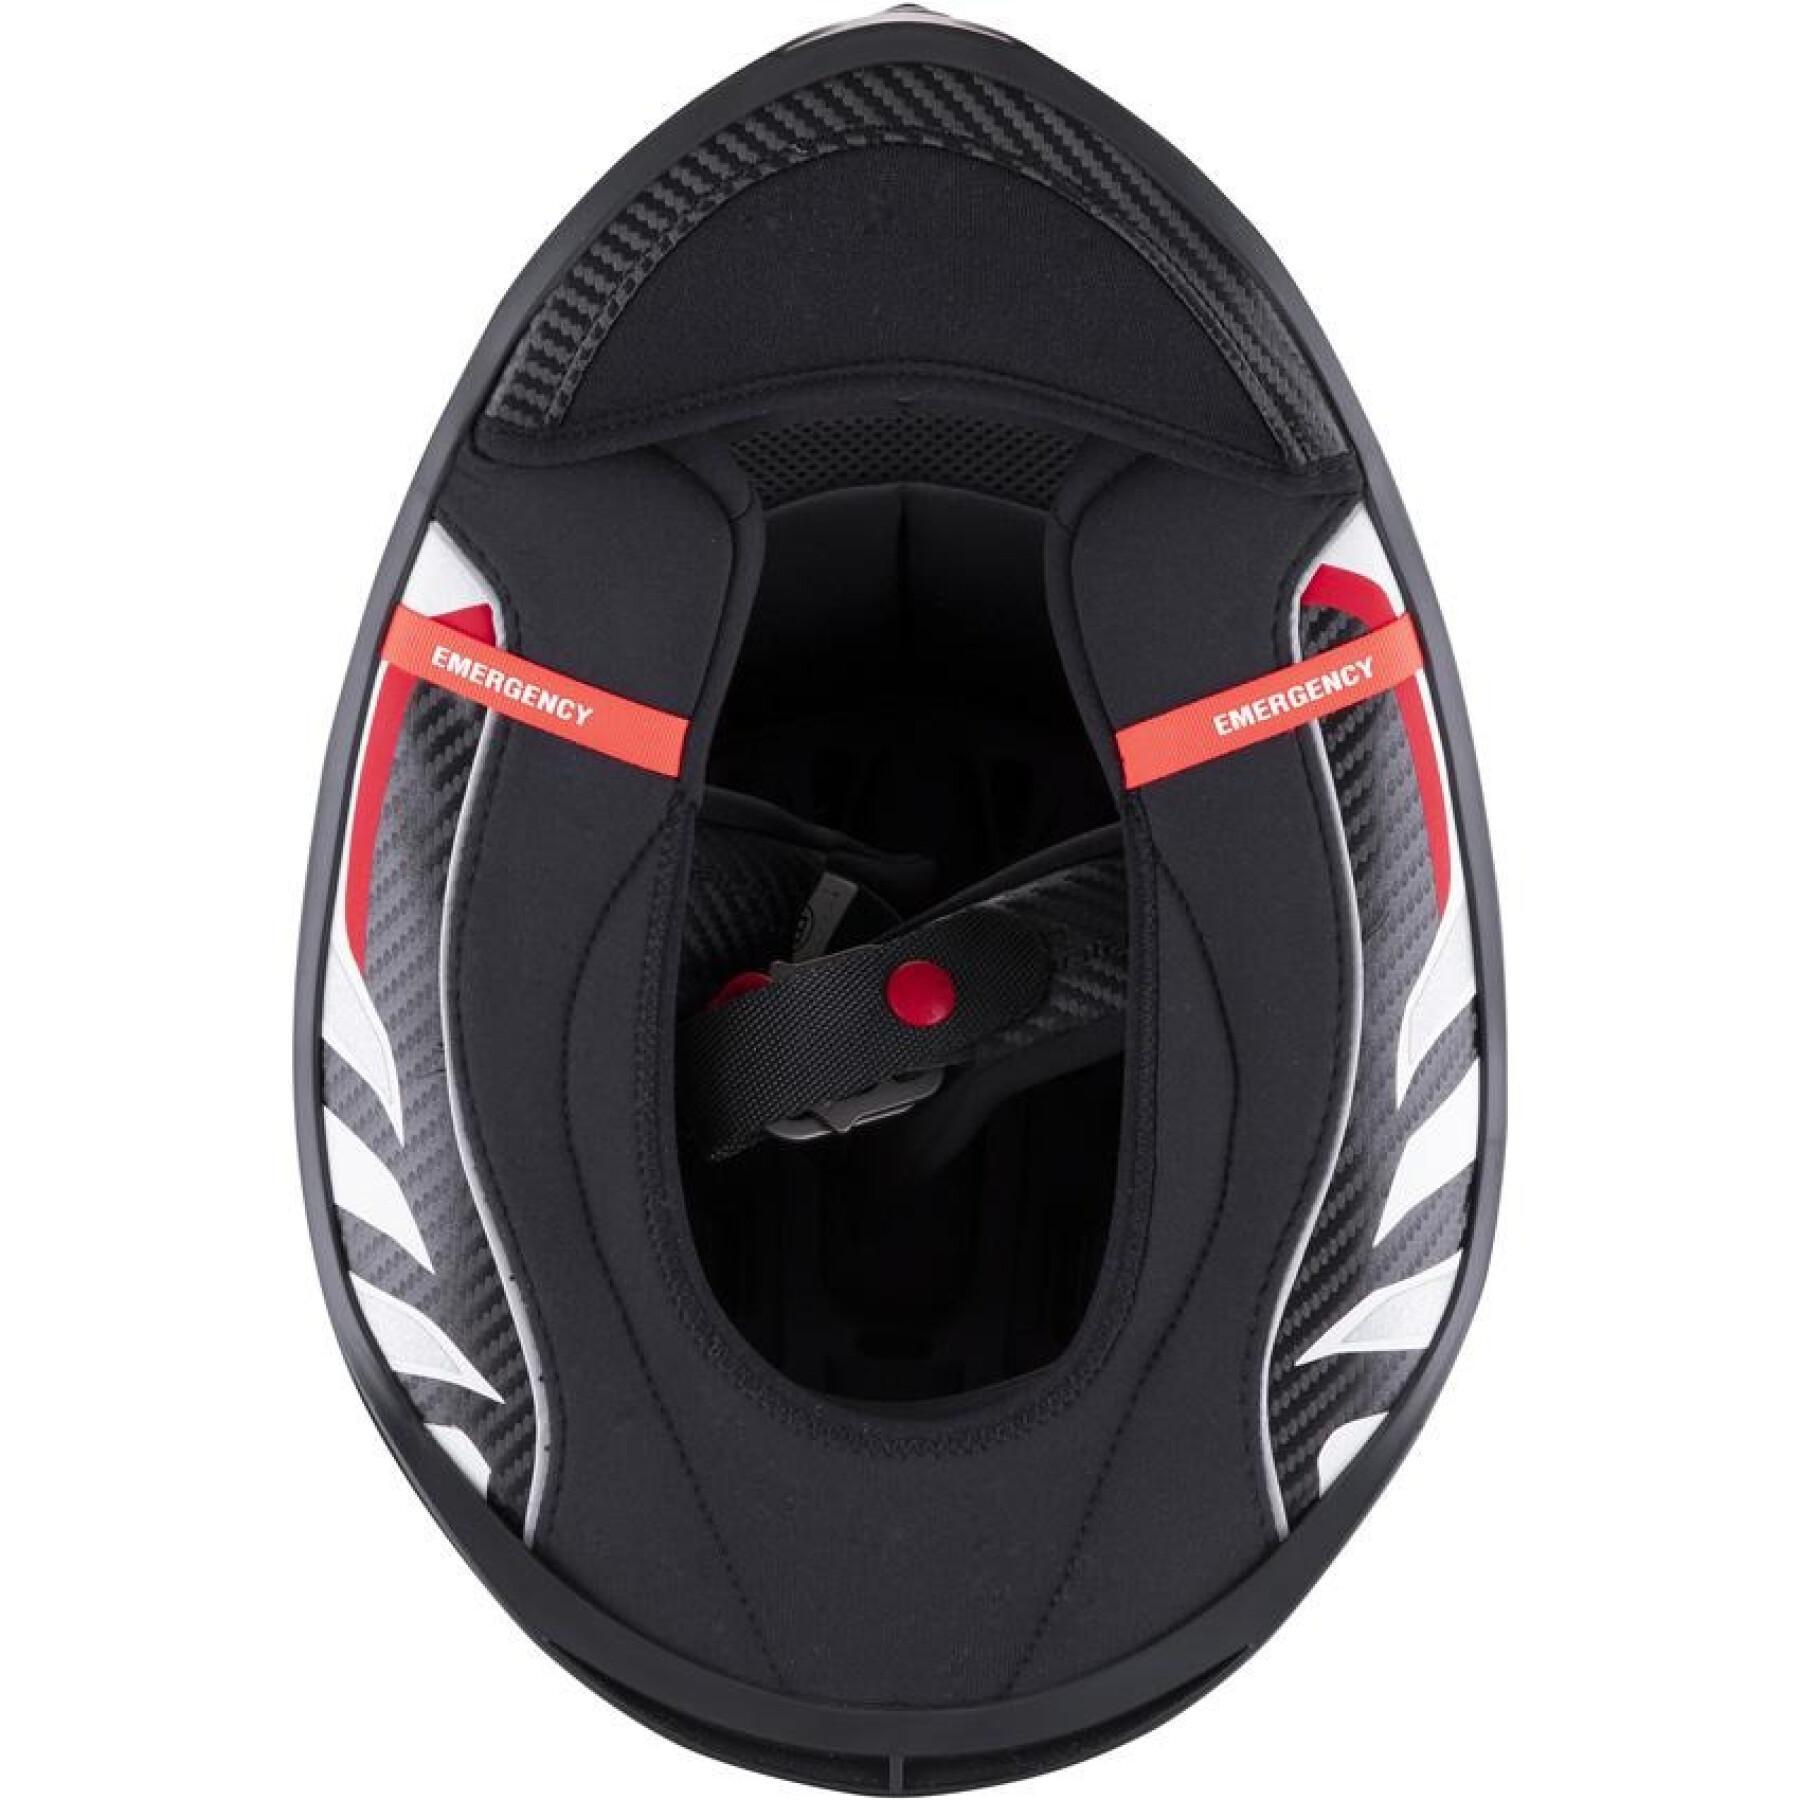 Capacete facial completo Scorpion Exo-R1 Carbon Air SOLID